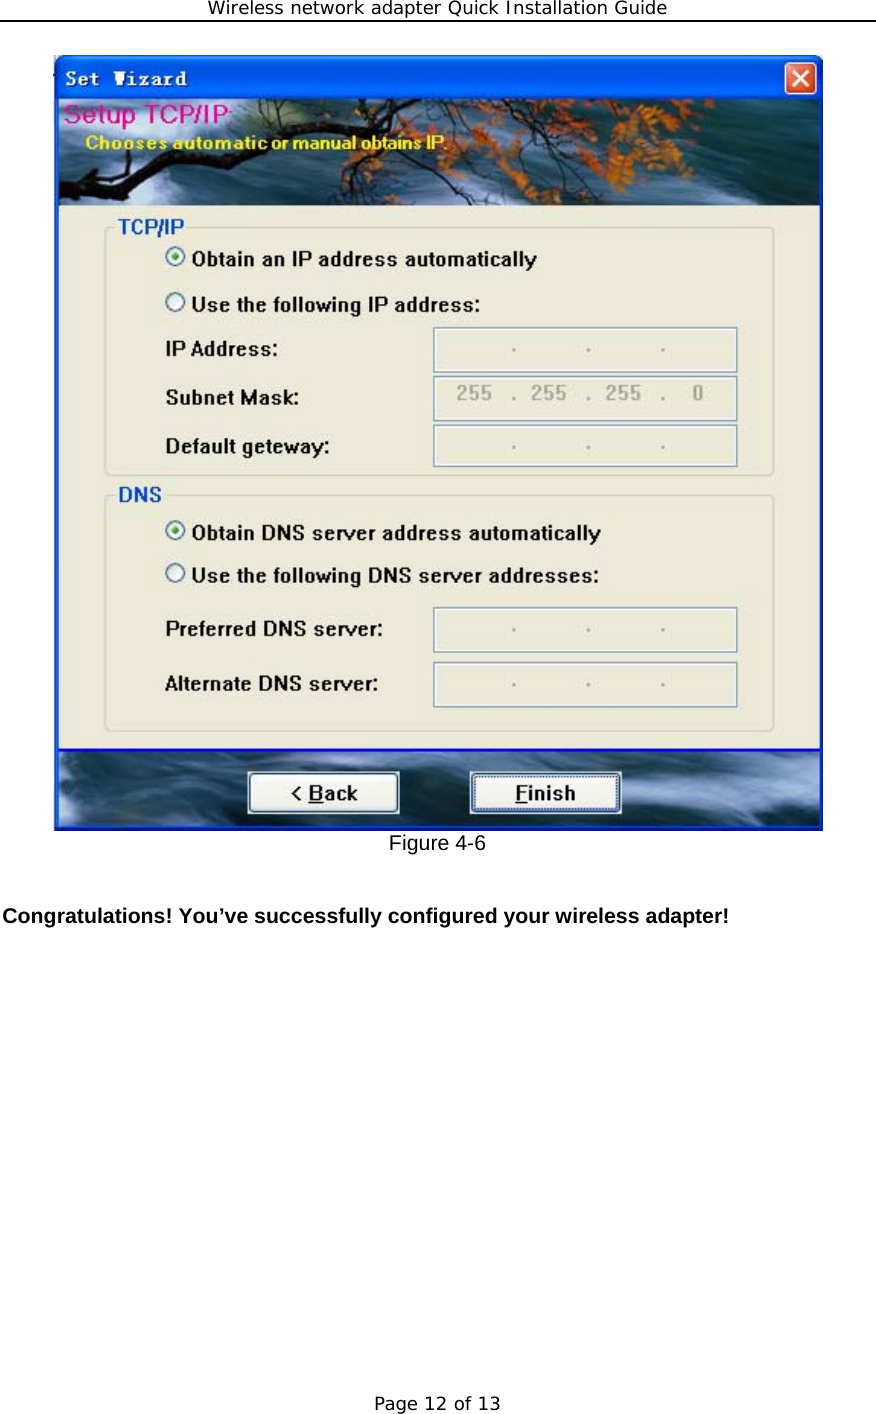 Wireless network adapter Quick Installation Guide Page 12 of 13  Figure 4-6   Congratulations! You’ve successfully configured your wireless adapter!                  